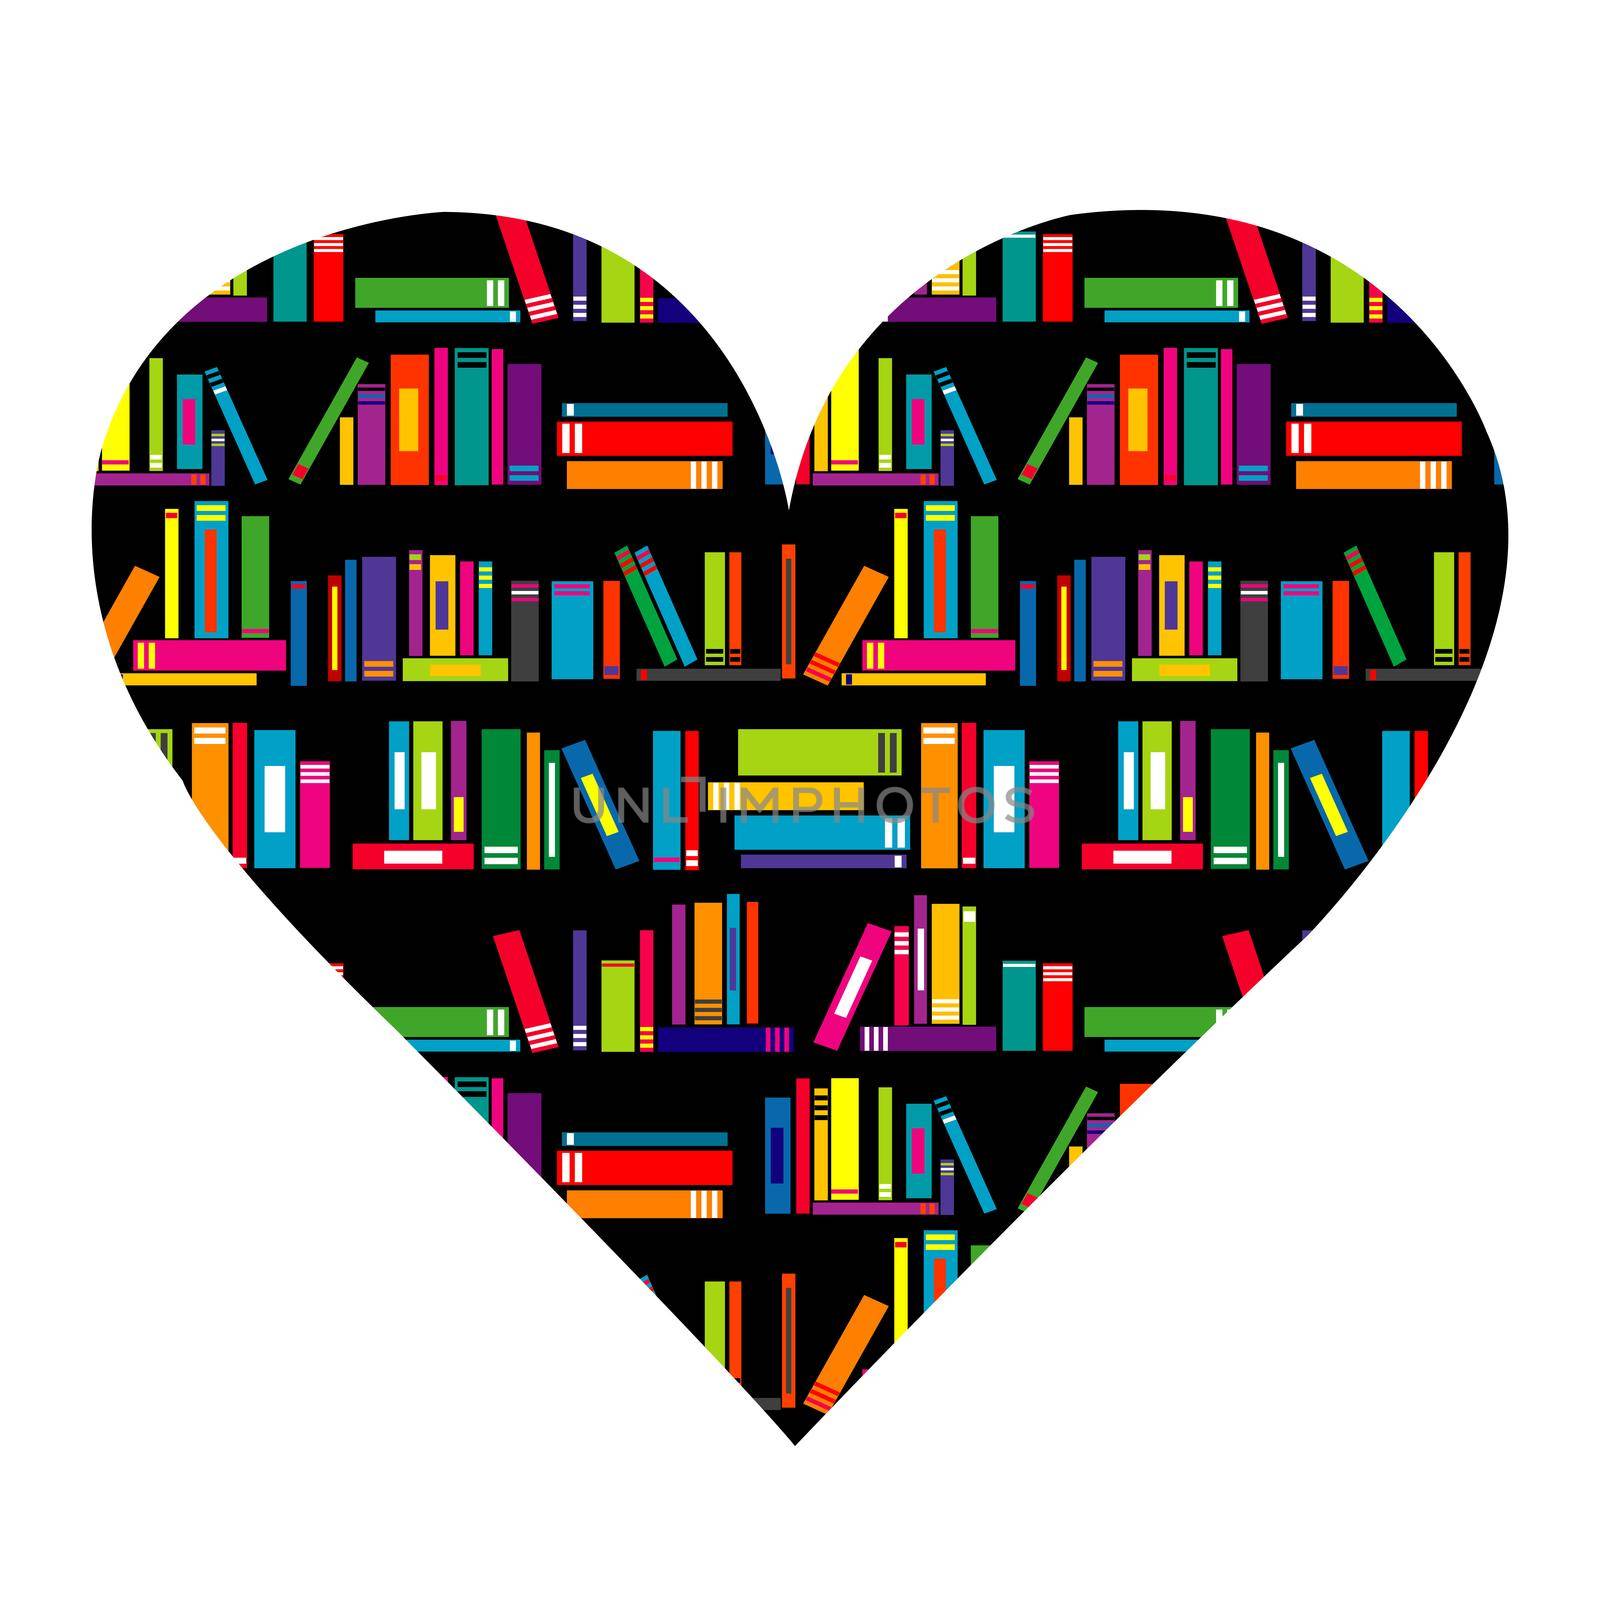 I love books concept with heart made of books by hibrida13